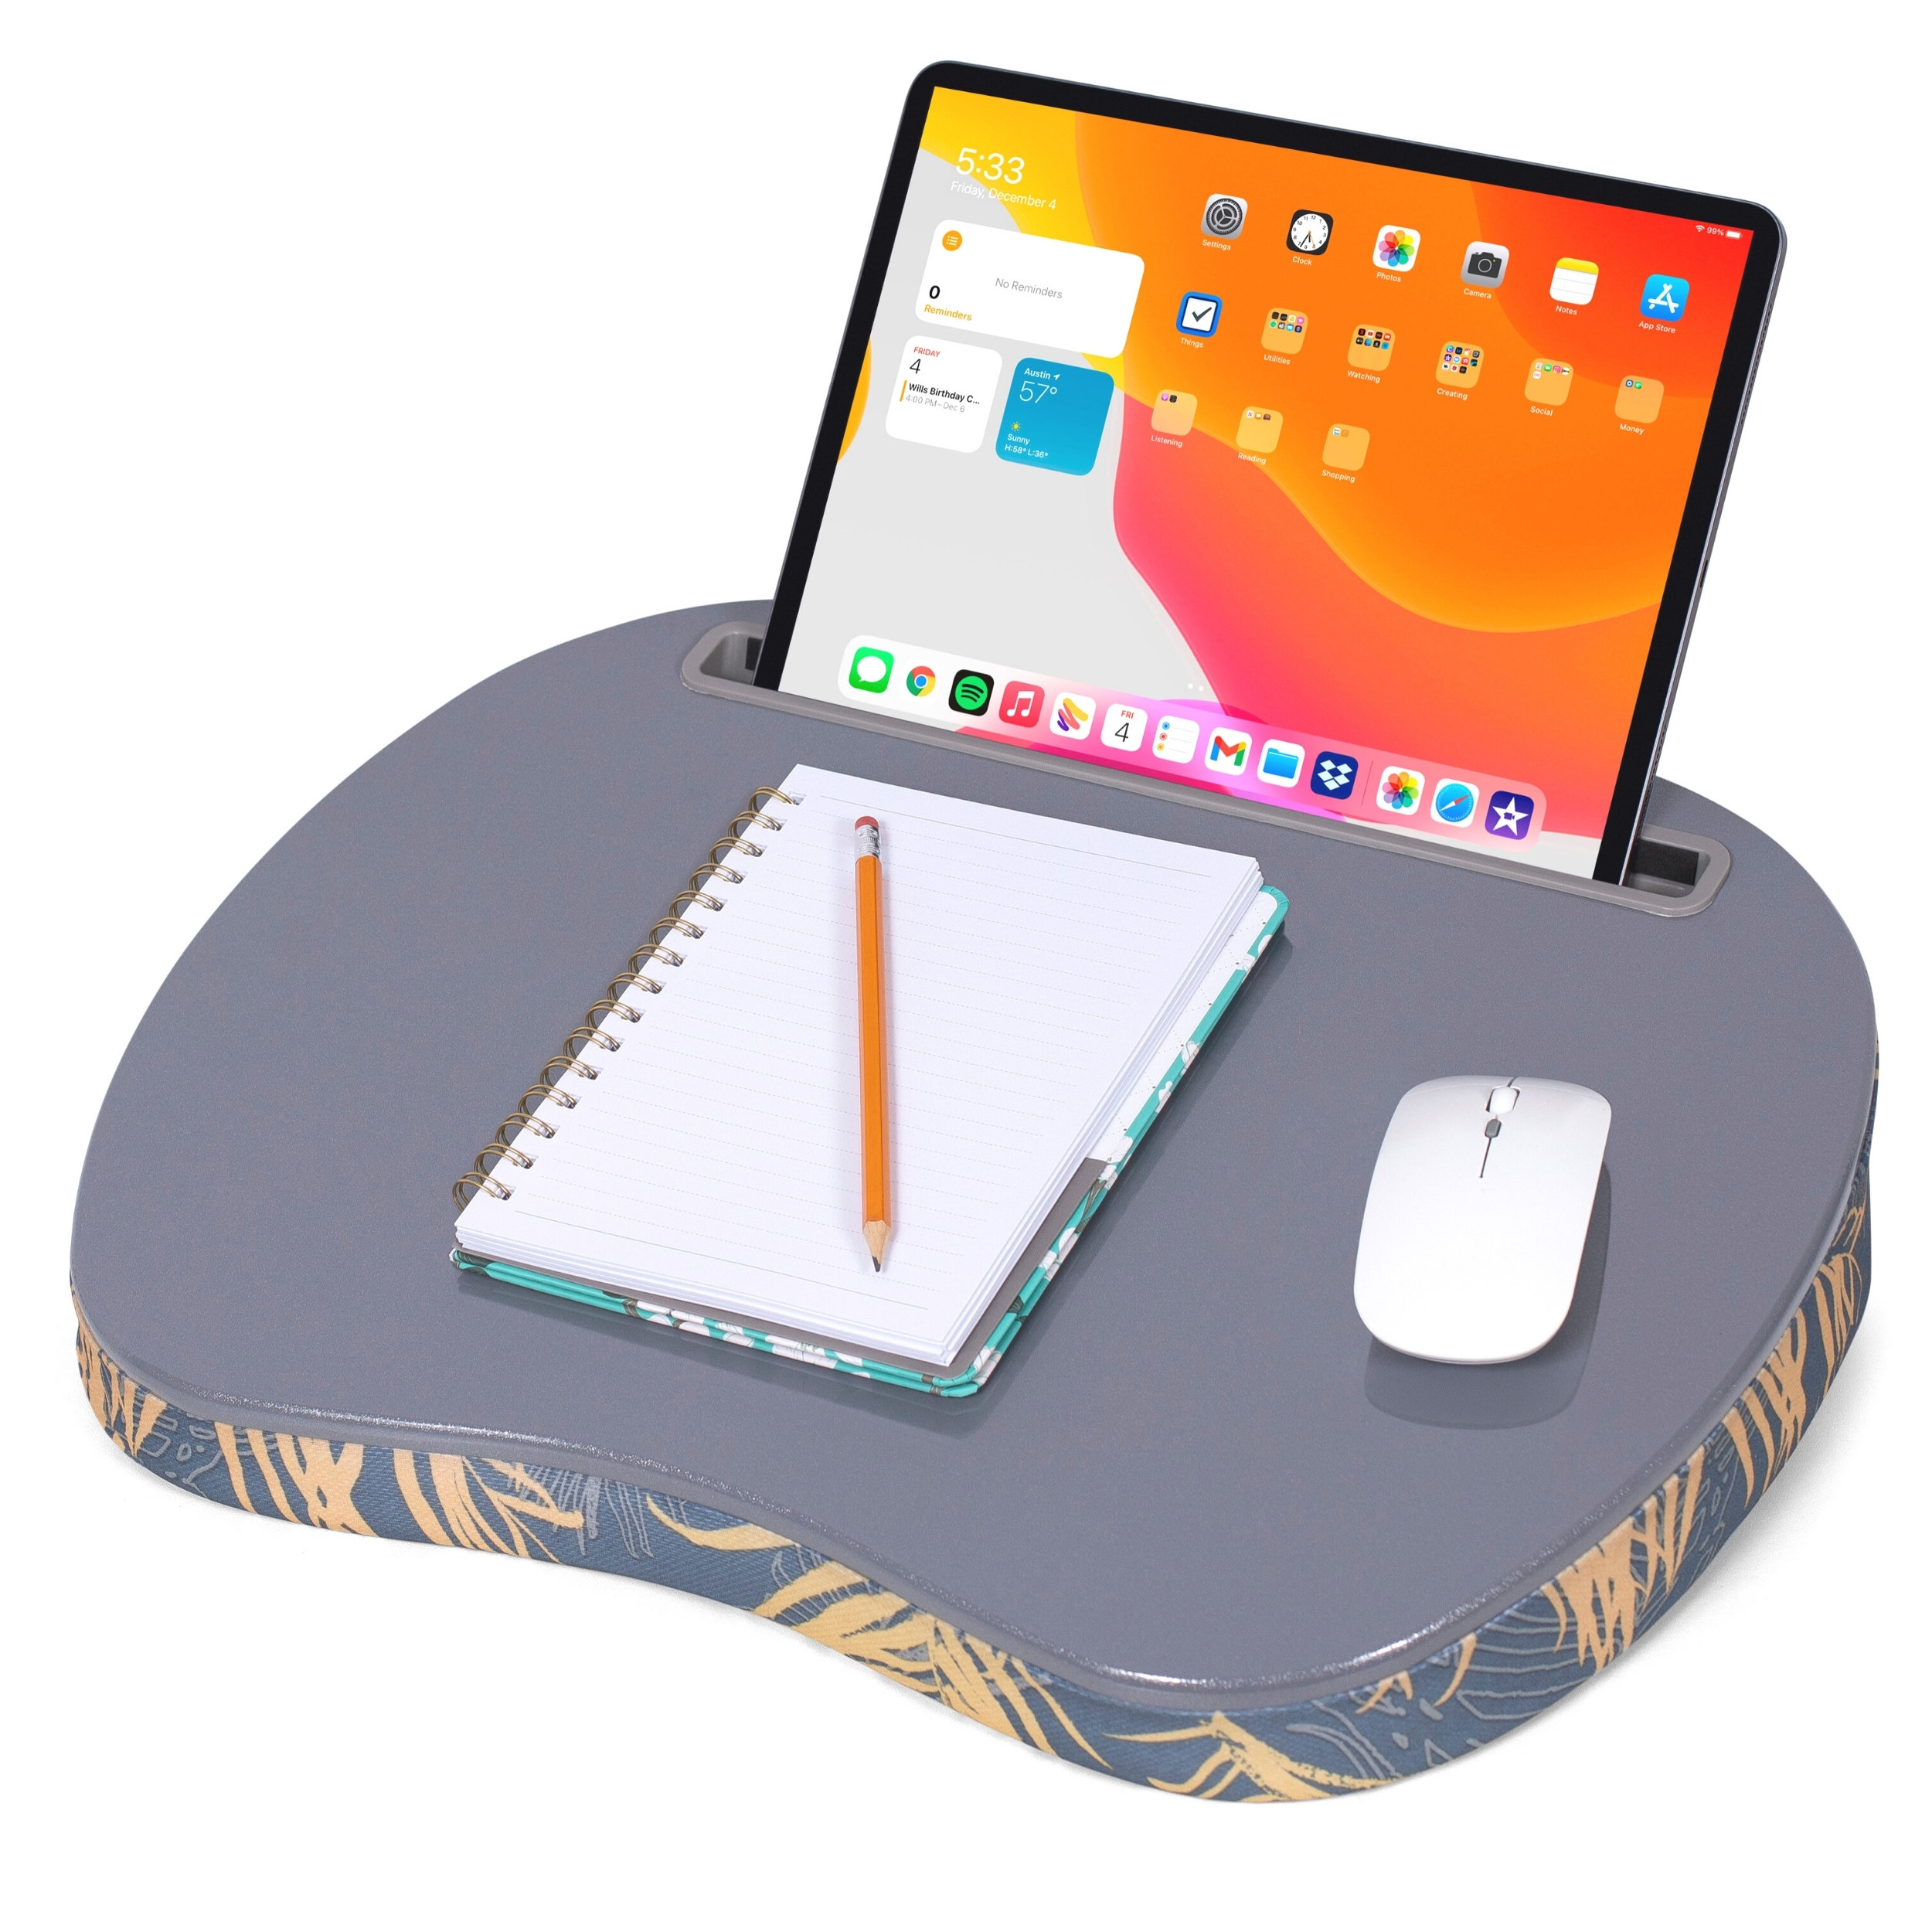 Traybo 2.0 Lap Desk, Bamboo Top Lap Desk With Pillow For Laptop